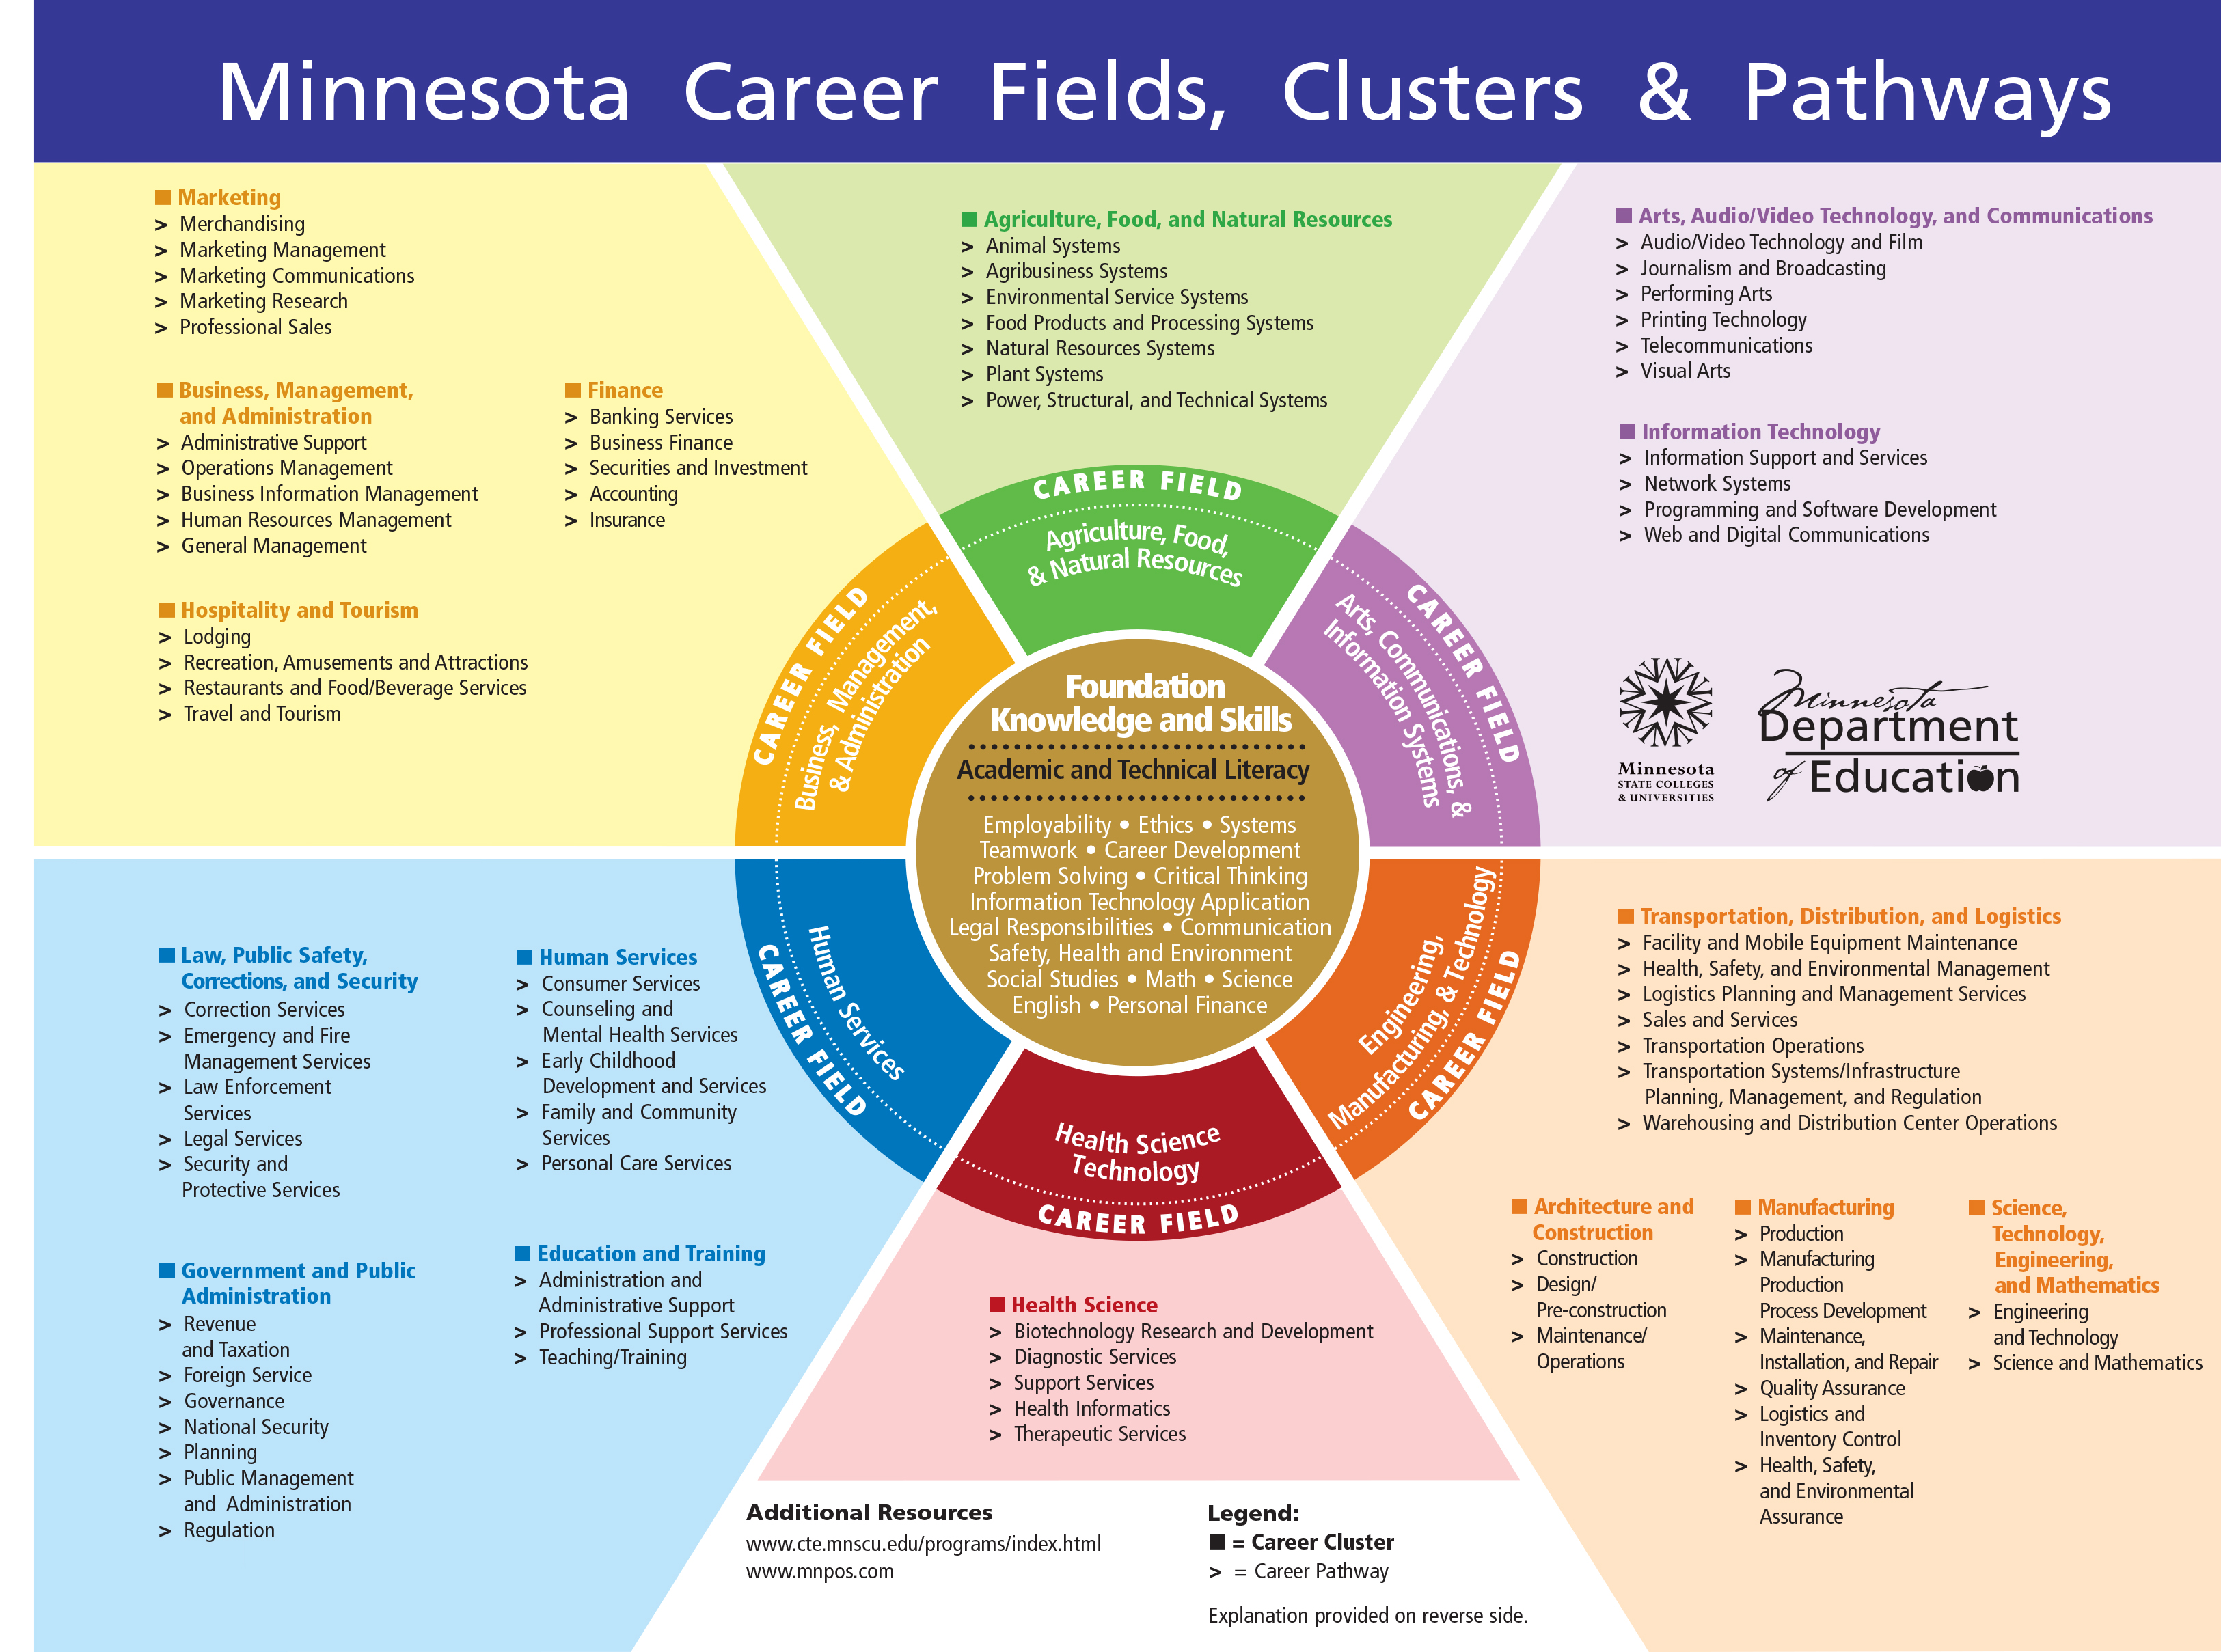 MN Career Fields, Clusters, & Pathways Chart